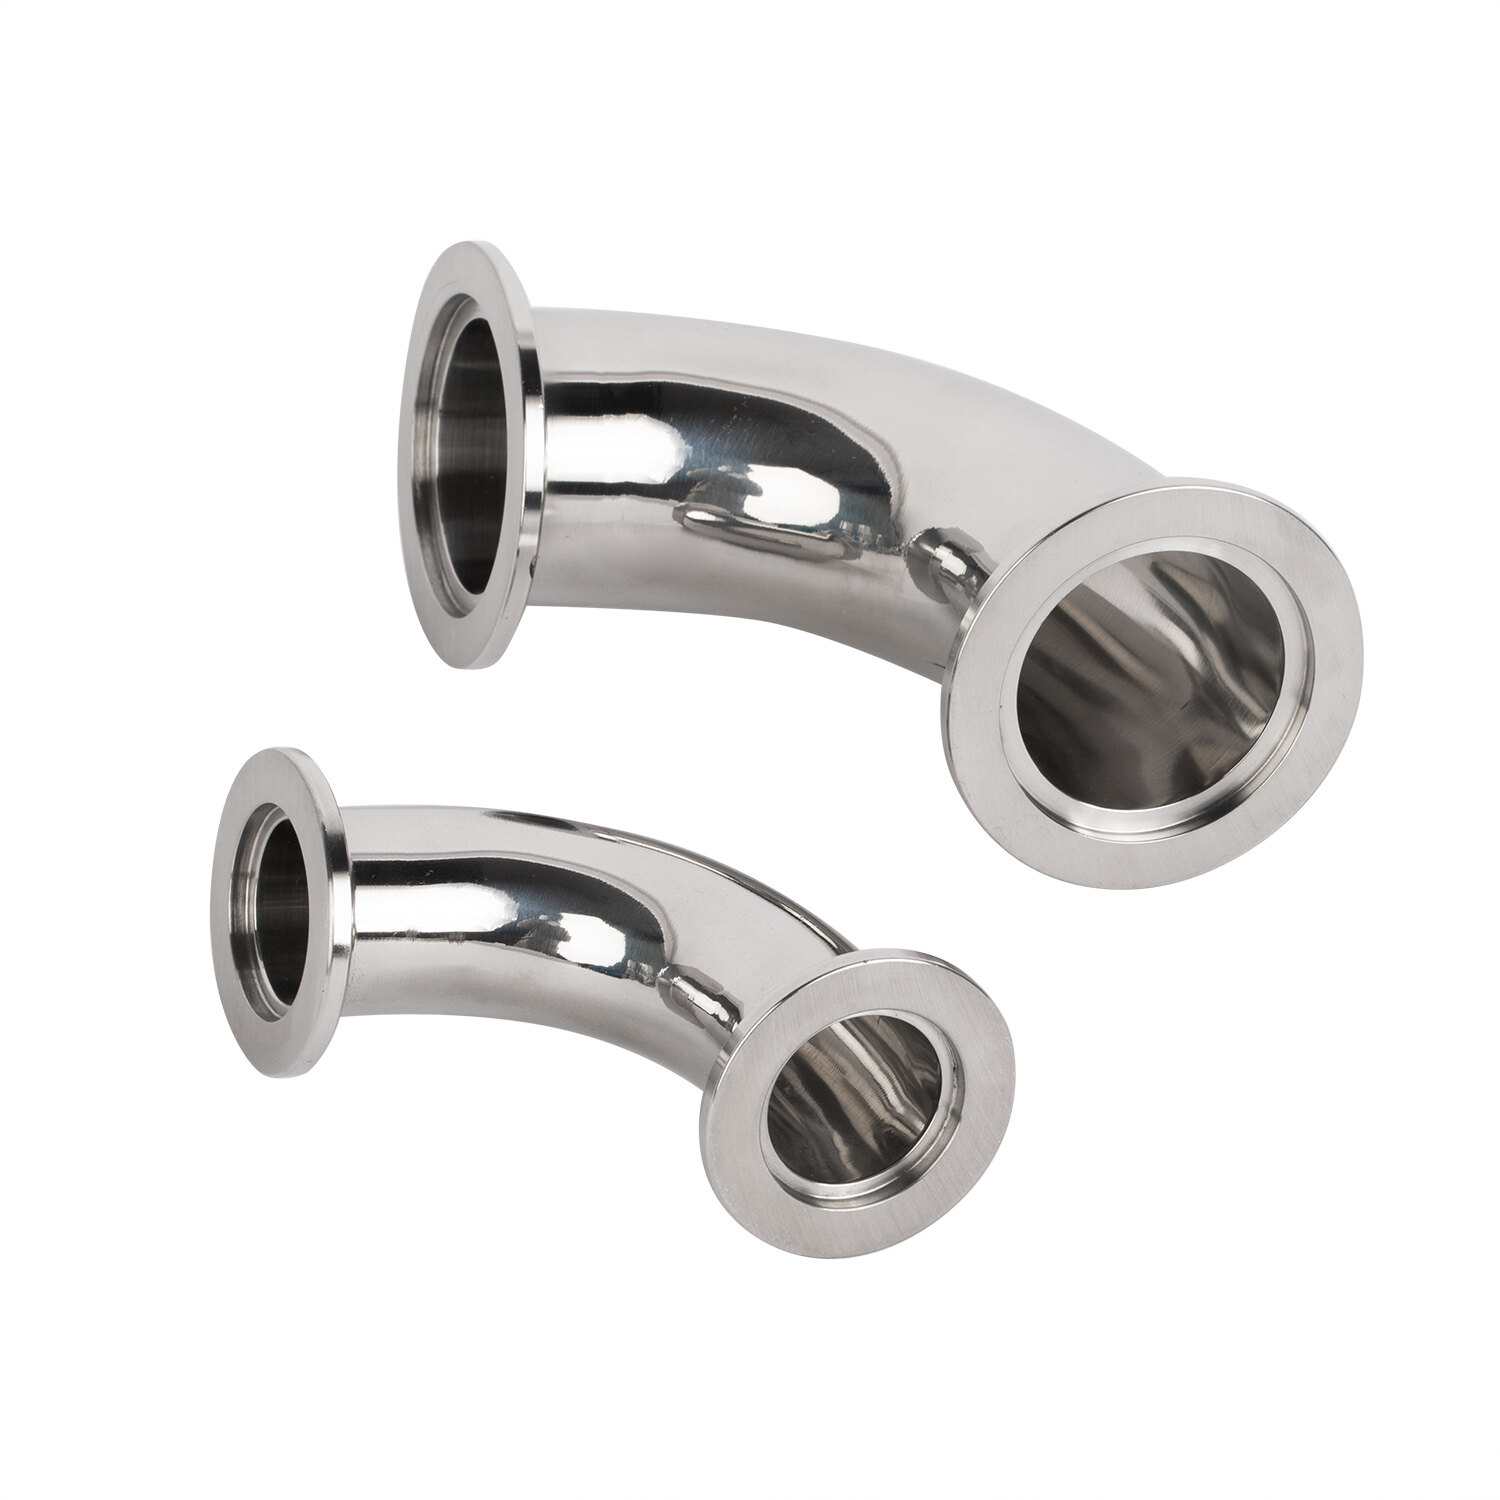 Stainless Steel SMS Sanitary Elbow Bend 90° Degree